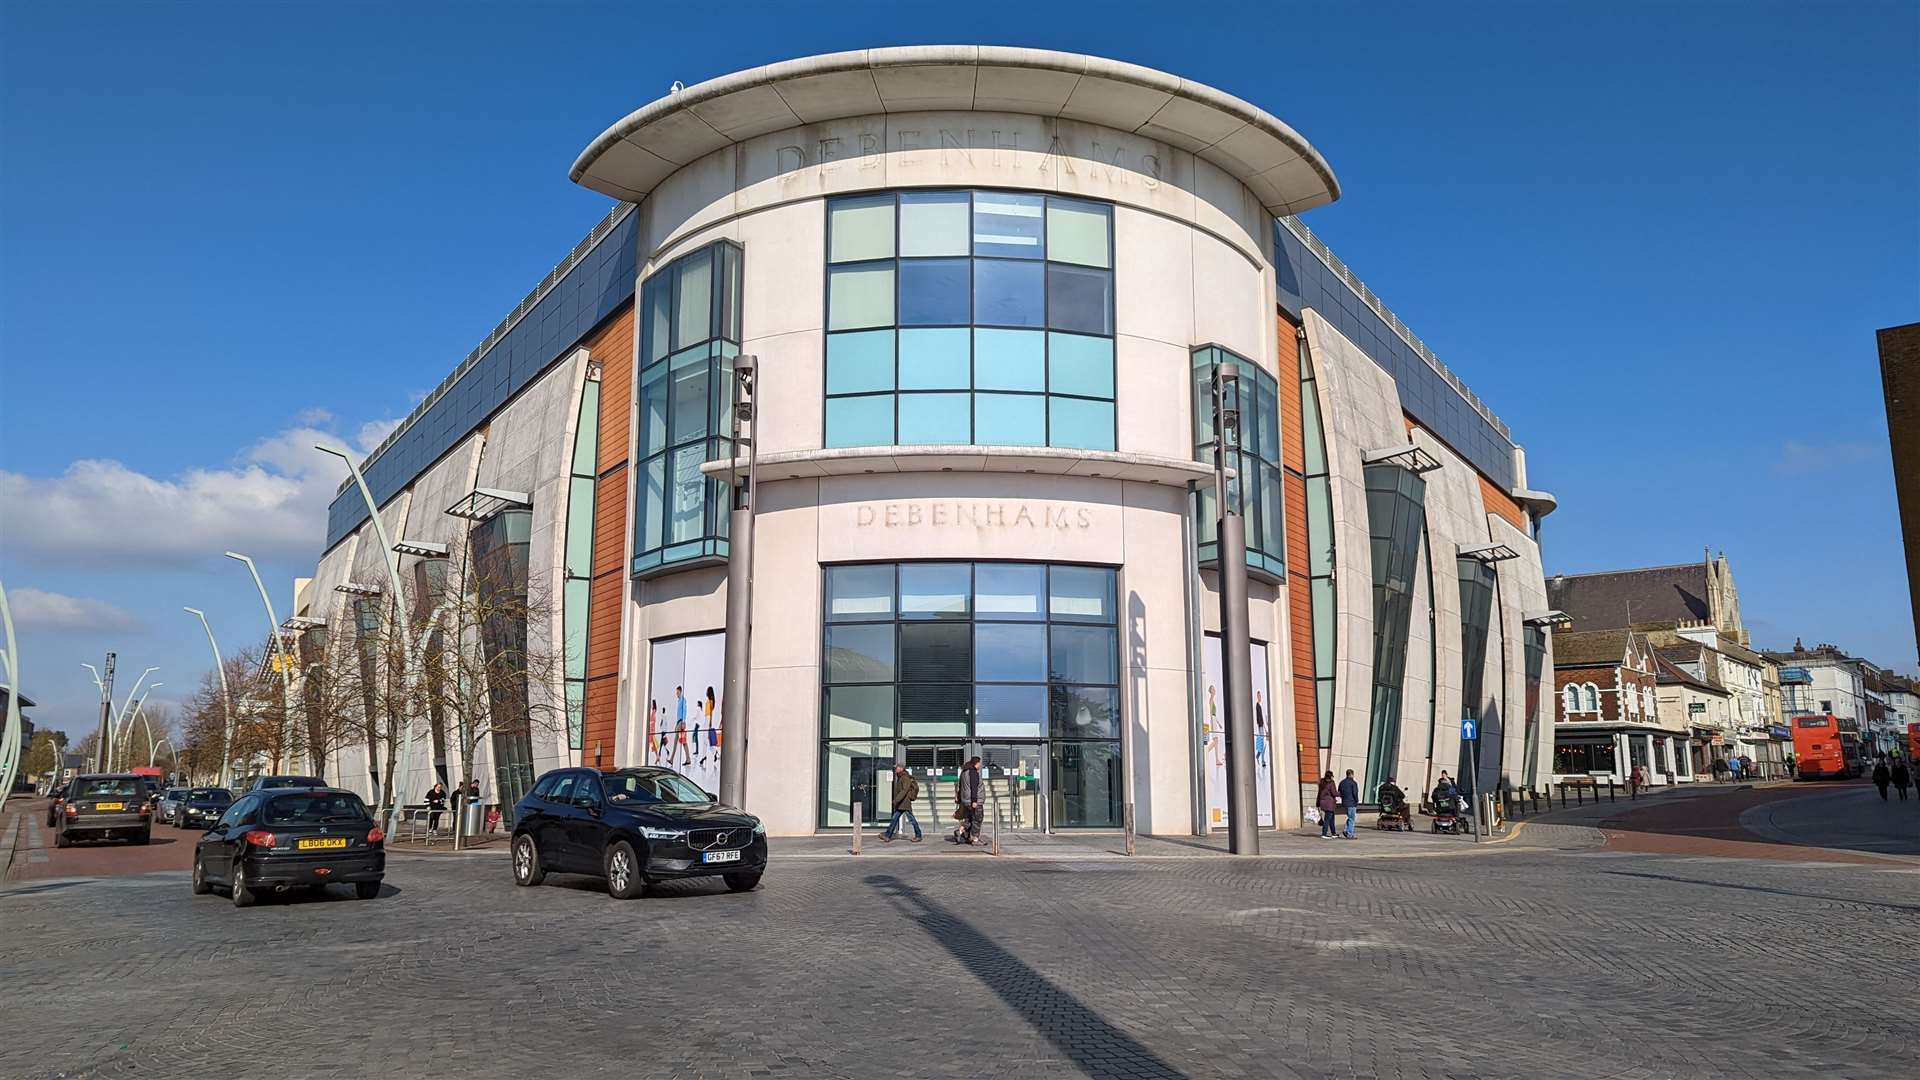 The ground floor of the former Debenhams could become a 'leisure and entertainment' space